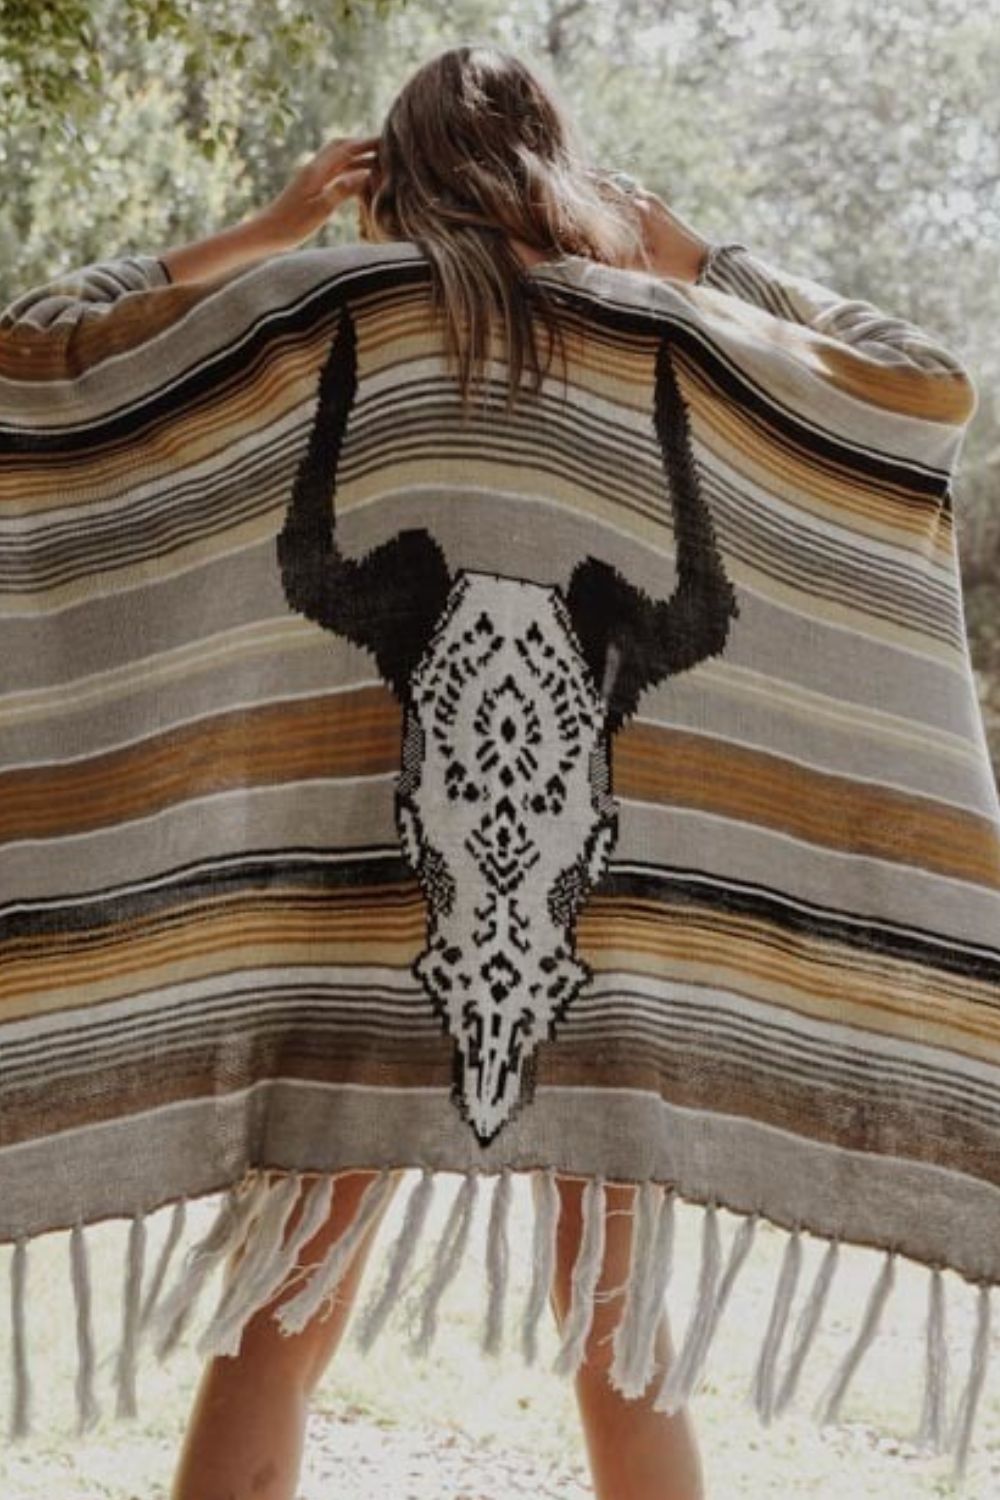 Desert Wanderer Cow Skull Striped Poncho - Multicolor / One Size - Women’s Clothing & Accessories - Clothing